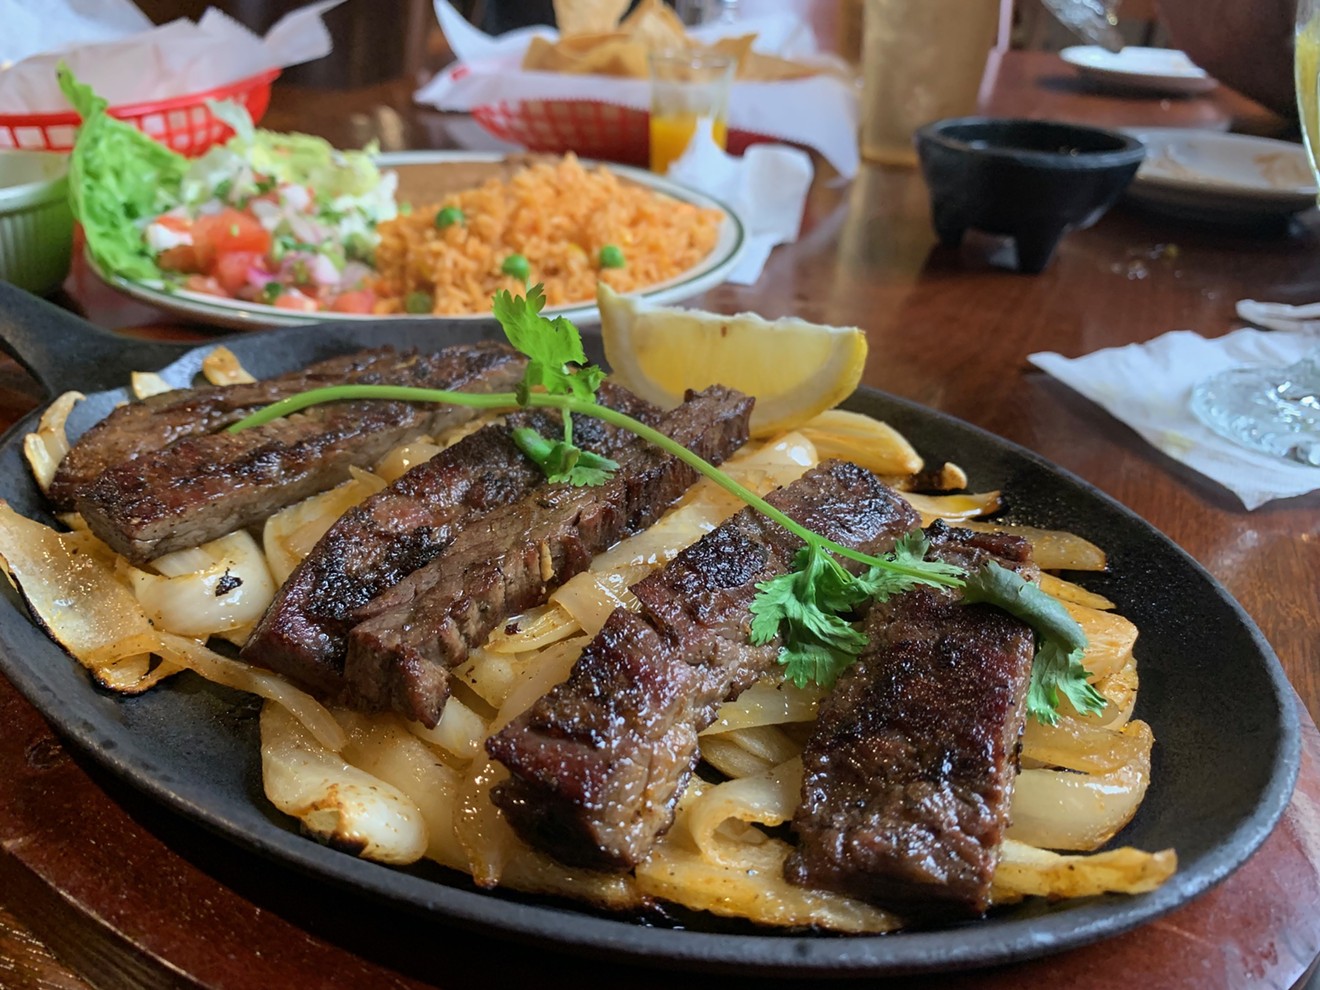 The steak fajitas could have been a little more tender.